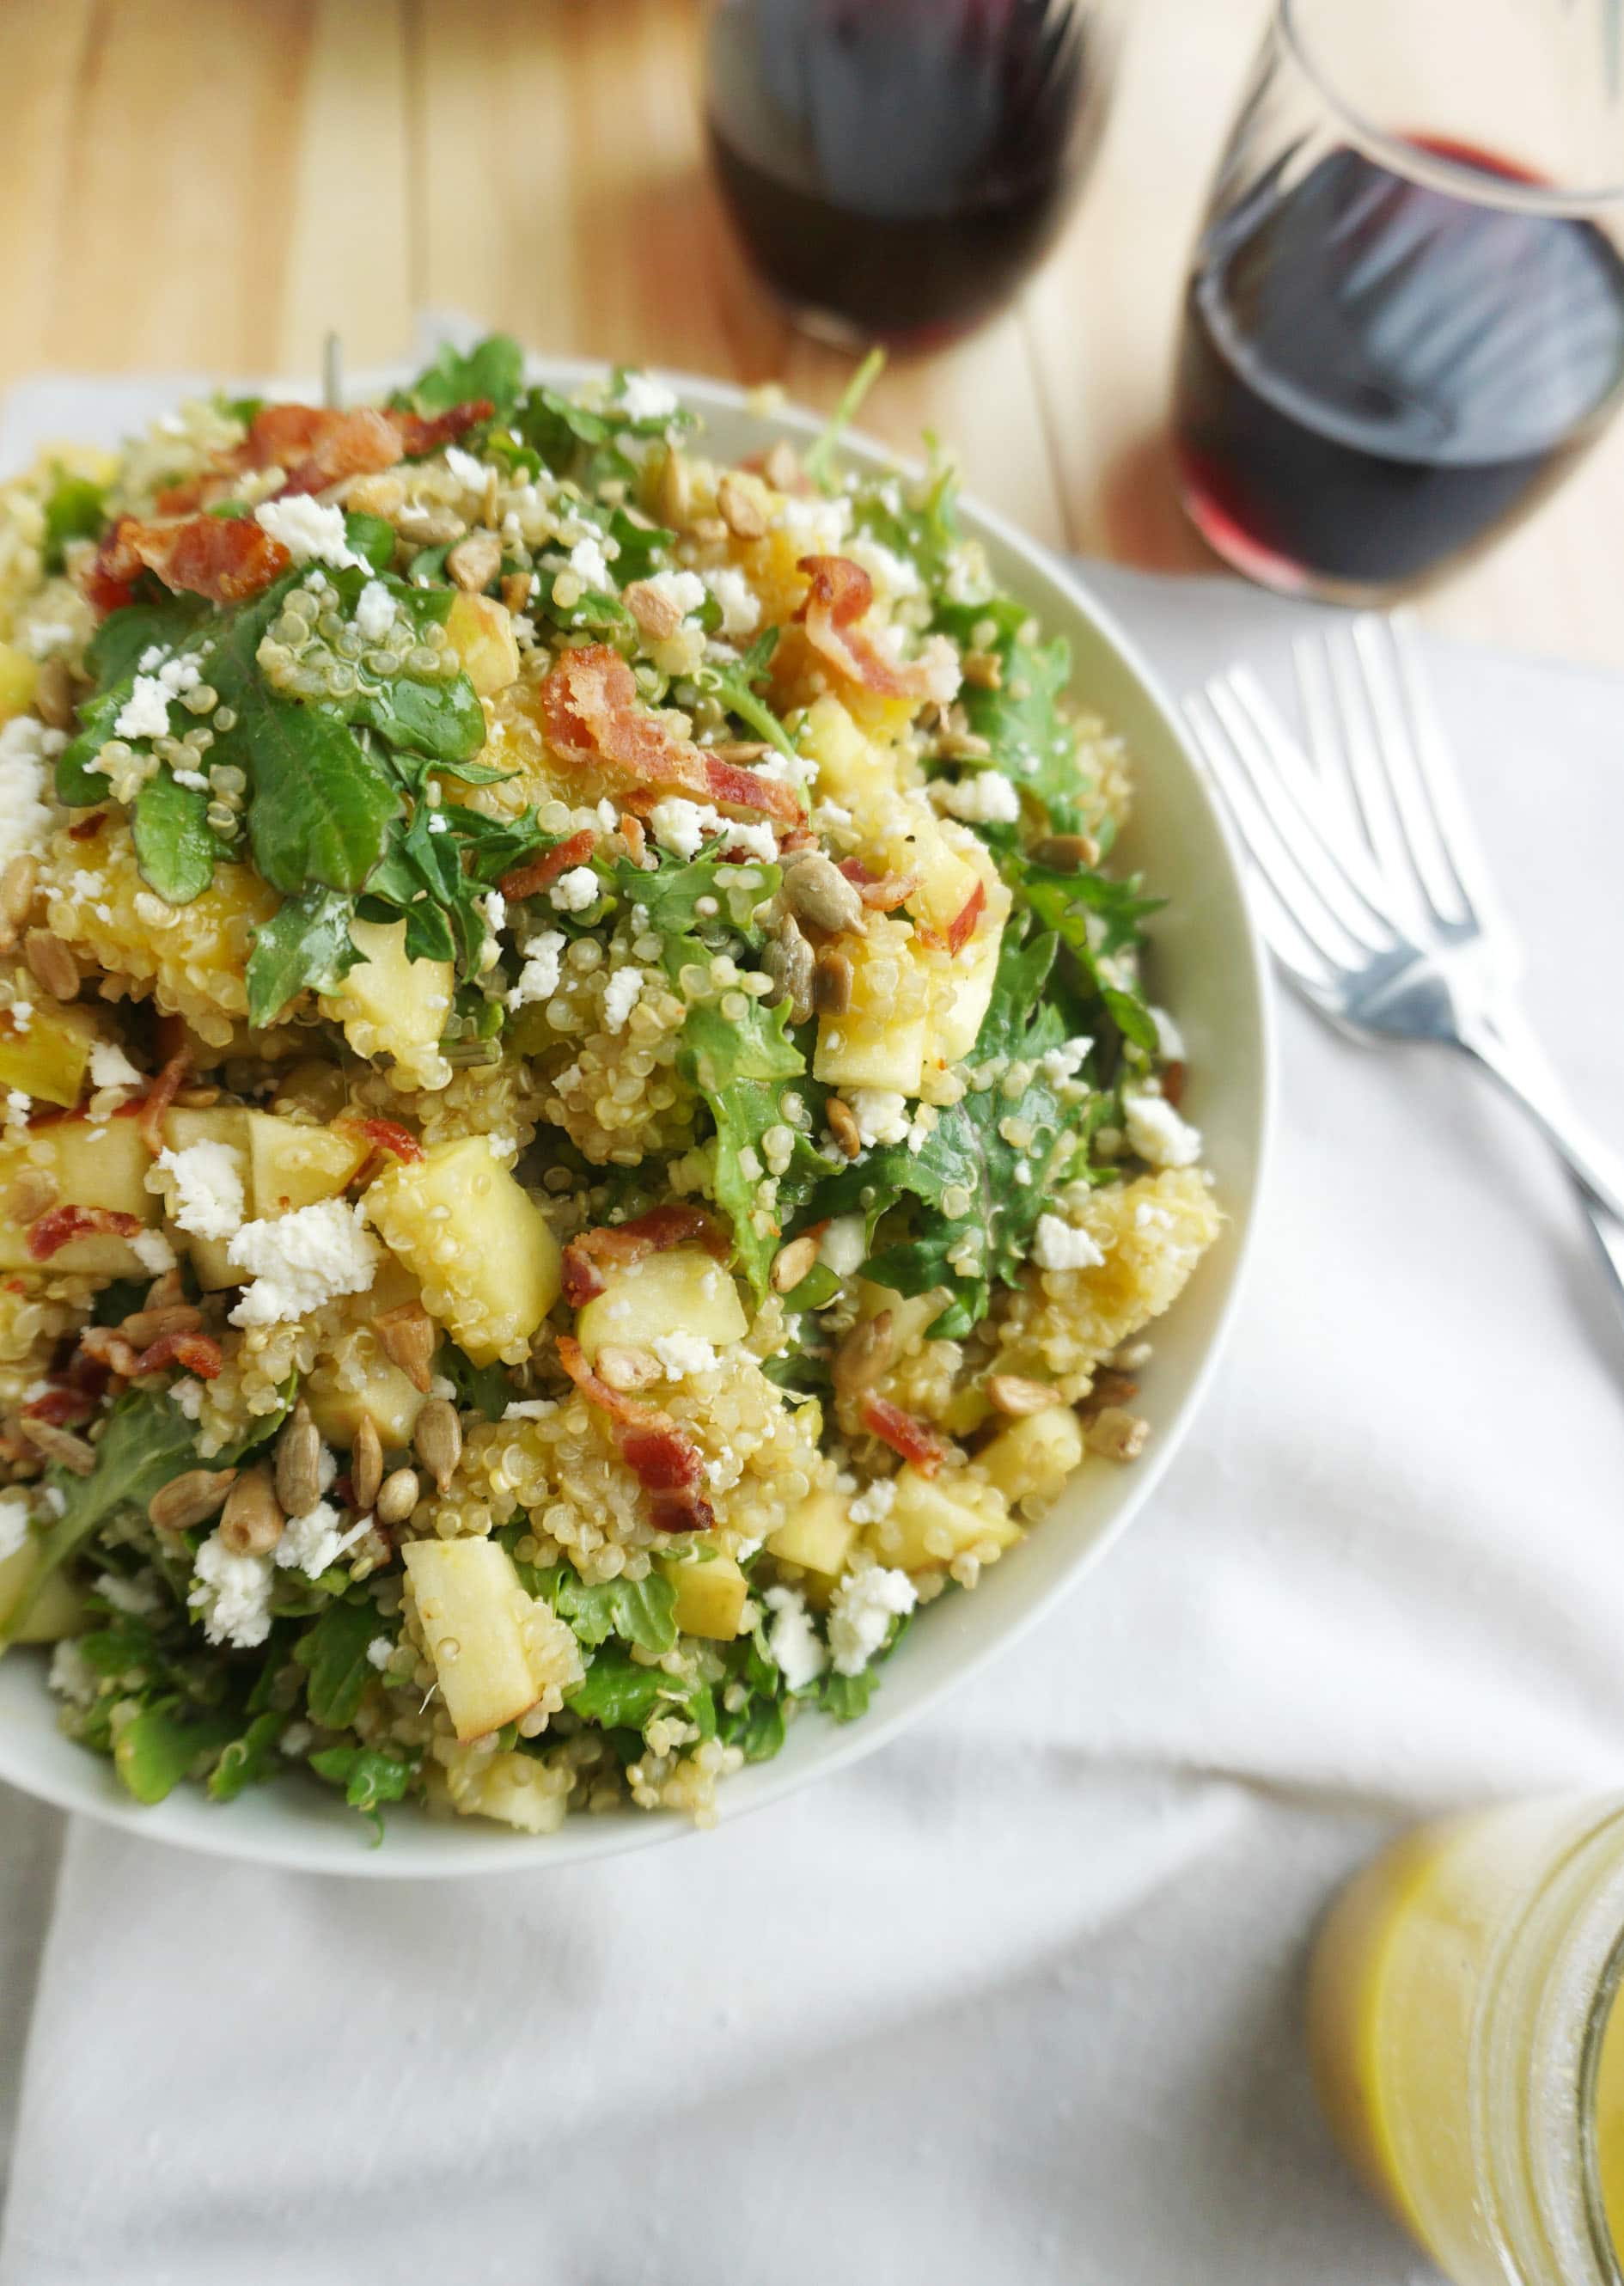 Bacon Quinoa Salad with Lemon Dijon Dressing in a bowl with forks and two glasses of red wine